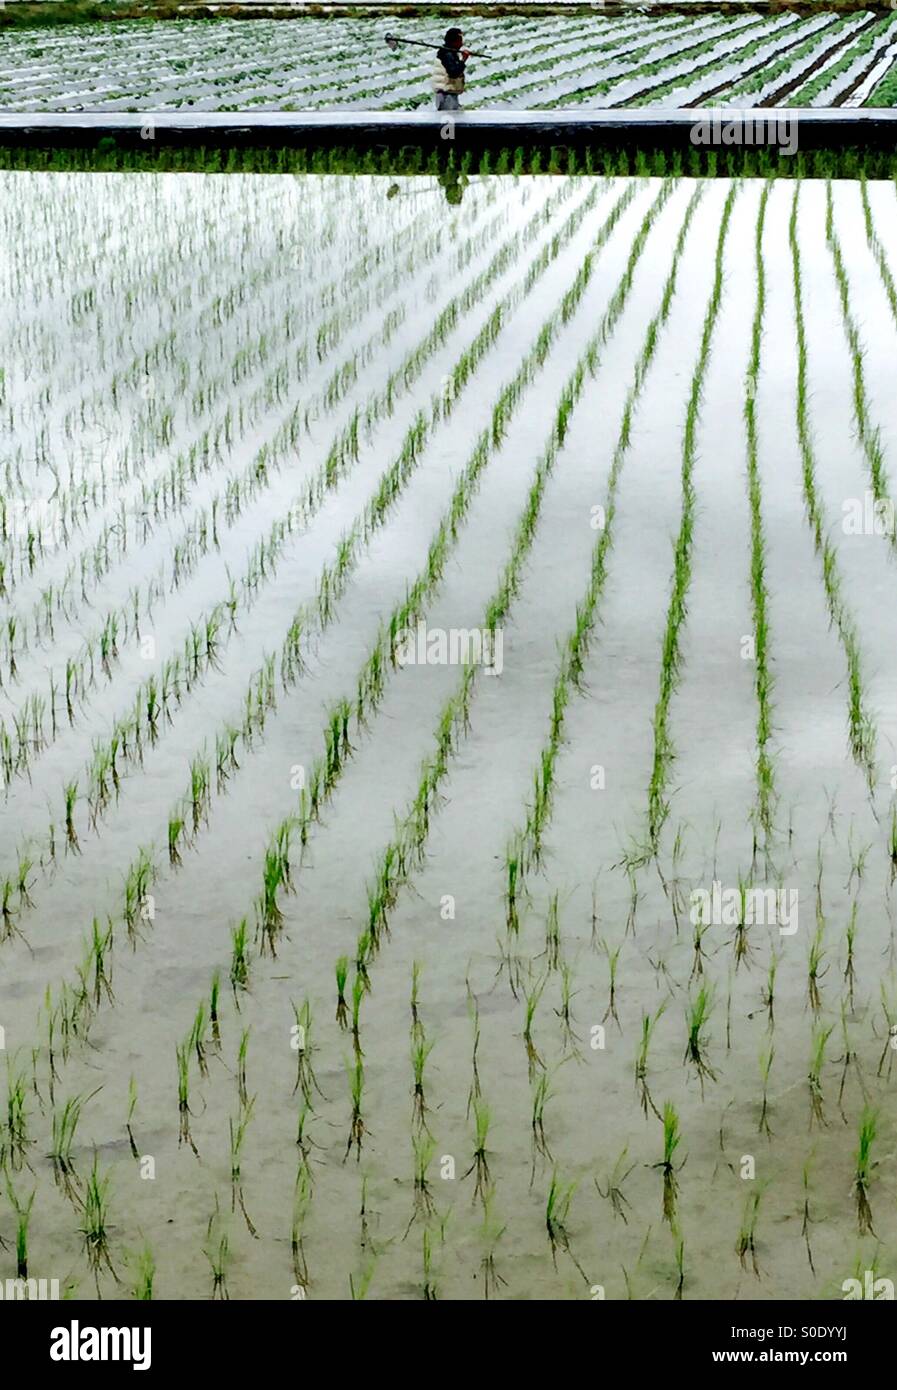 Japanese rice farmer ending a full day in the field Stock Photo